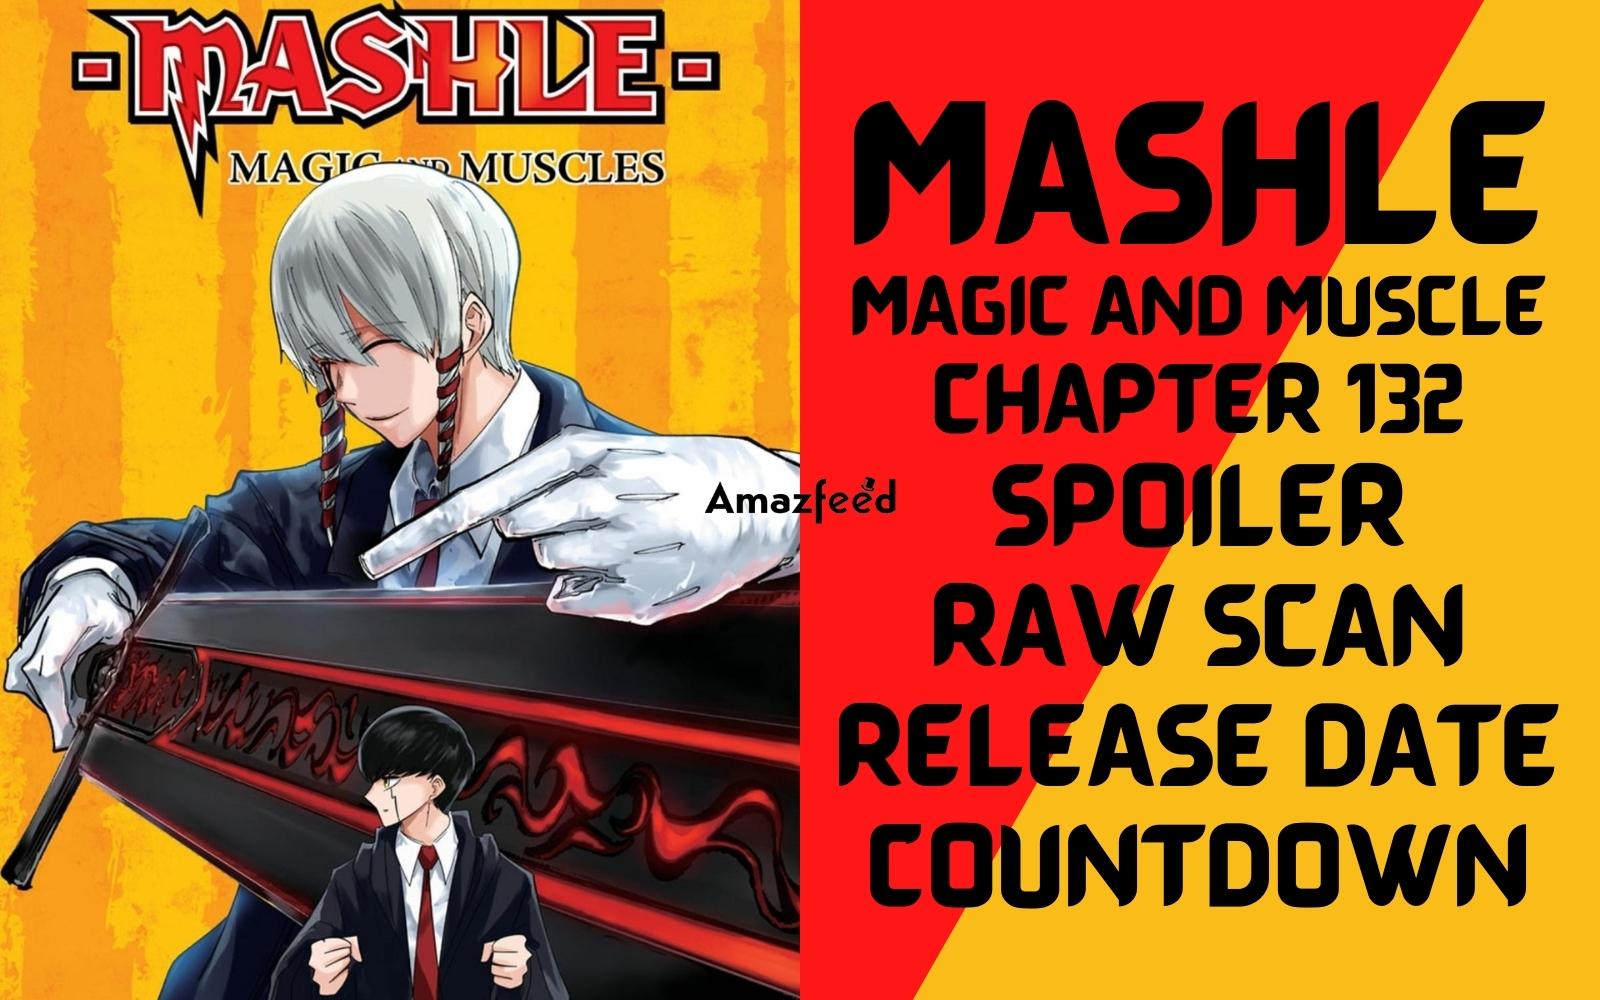 Mashle Magic And Muscle Chapter 132 Spoiler, Raw Scan, Color Page, Release Date